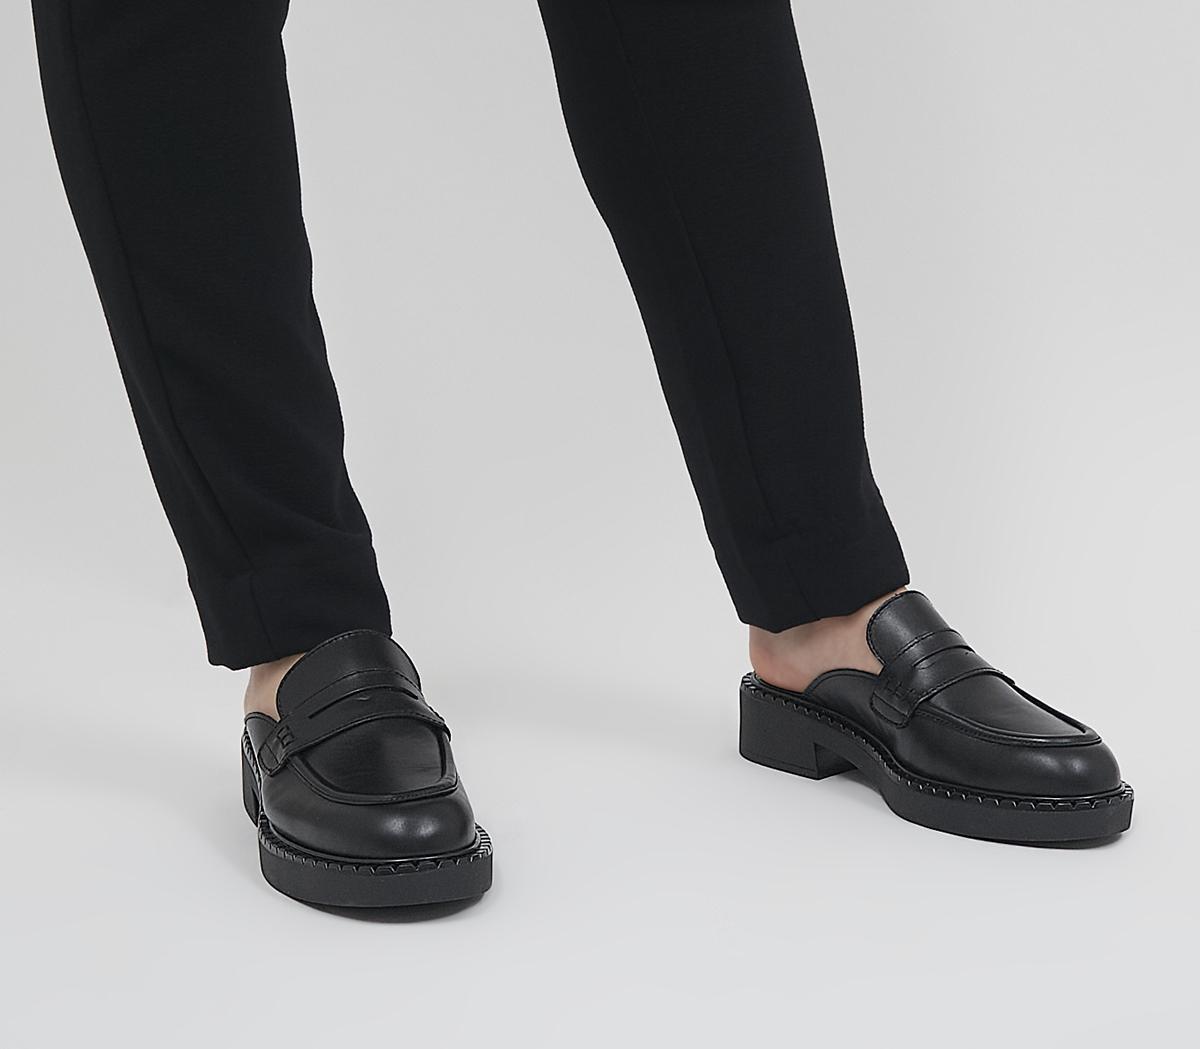 OfficeFavourite Loafer MulesBlack Leather